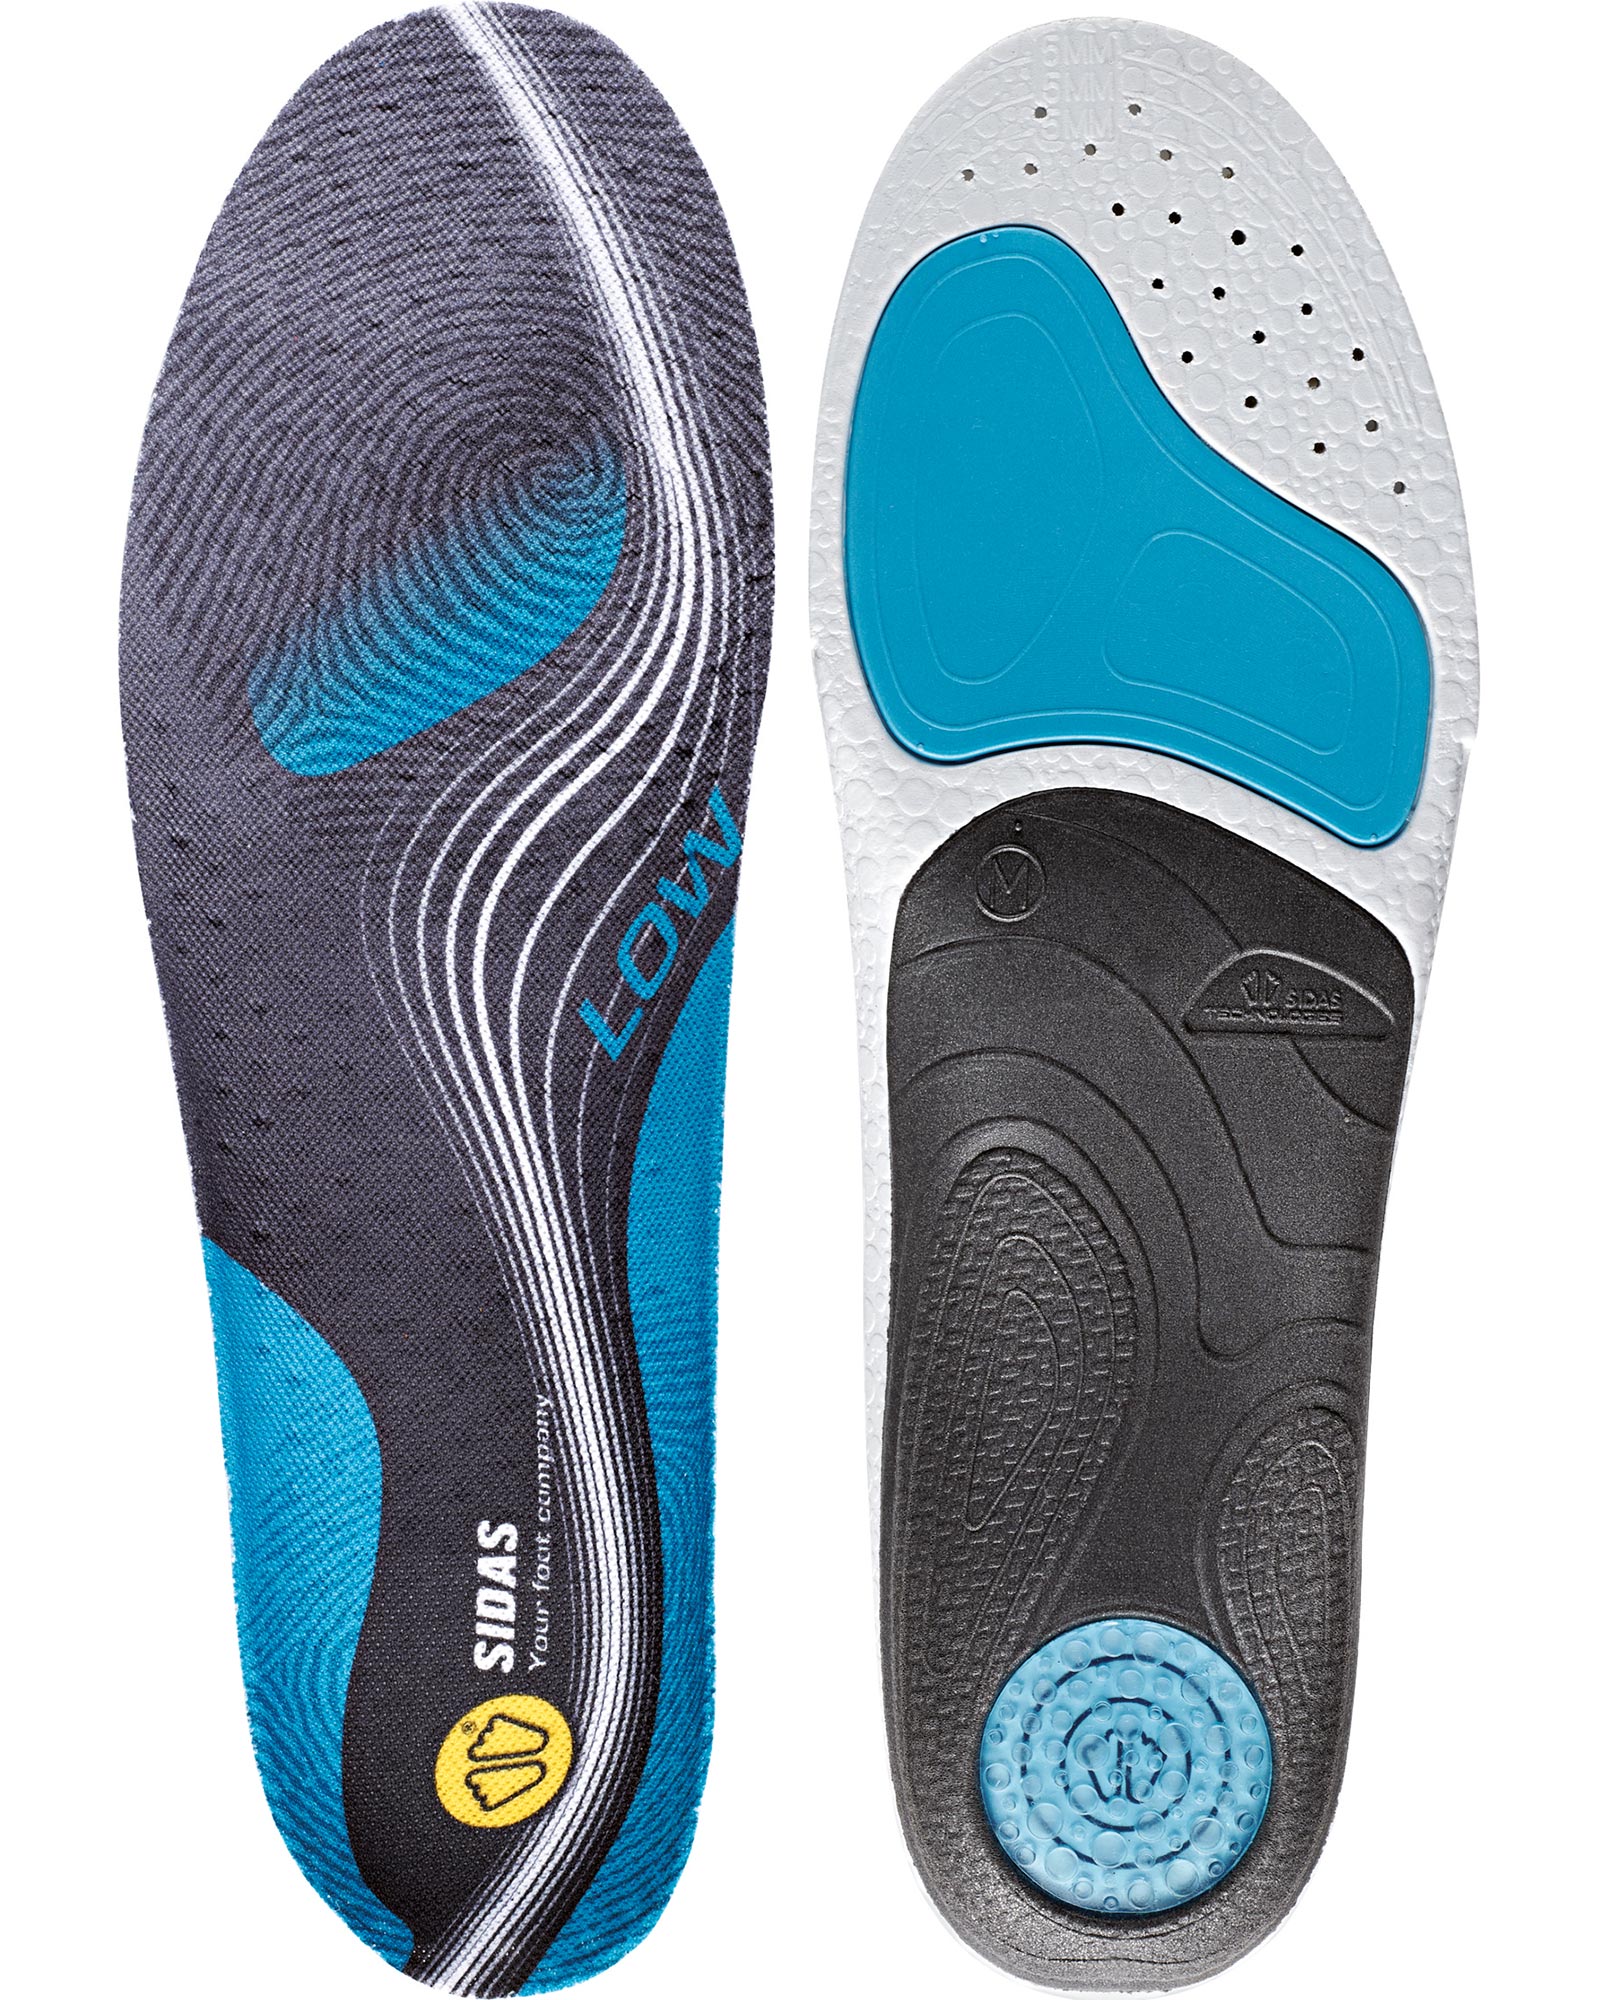 Sidas 3feet Activ Low Insoles